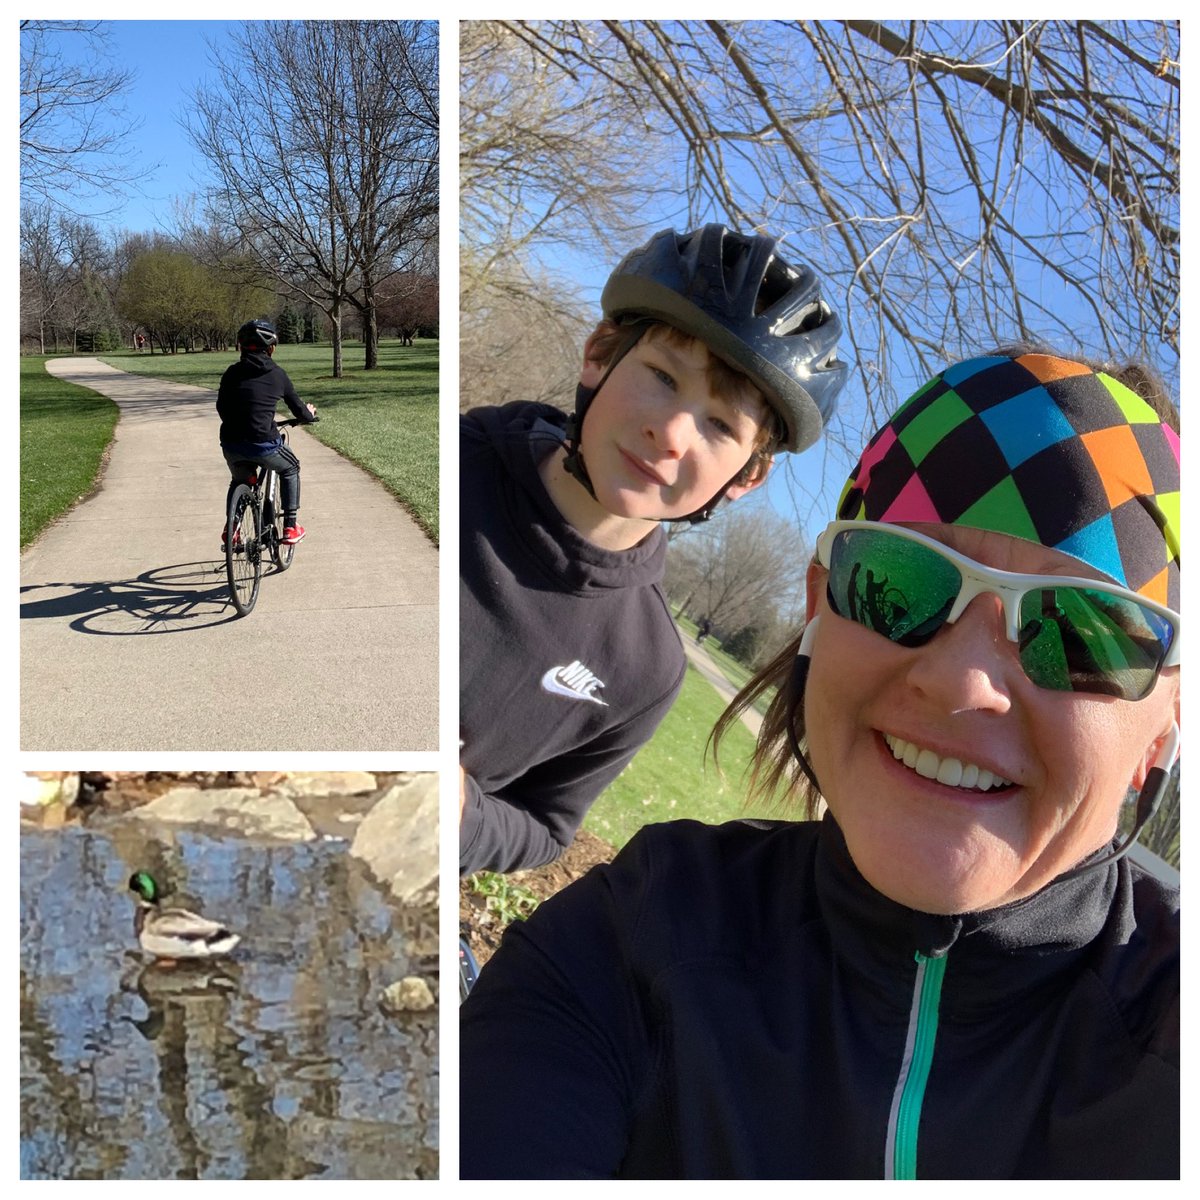 Saturday’s are for the Mom’s! Quick 5k with my #1 lead cyclist! Special thx to the mallard who I felt was cheering us on. #runnerMom 🏃🏻‍♀️❤️🚴🏼🦆